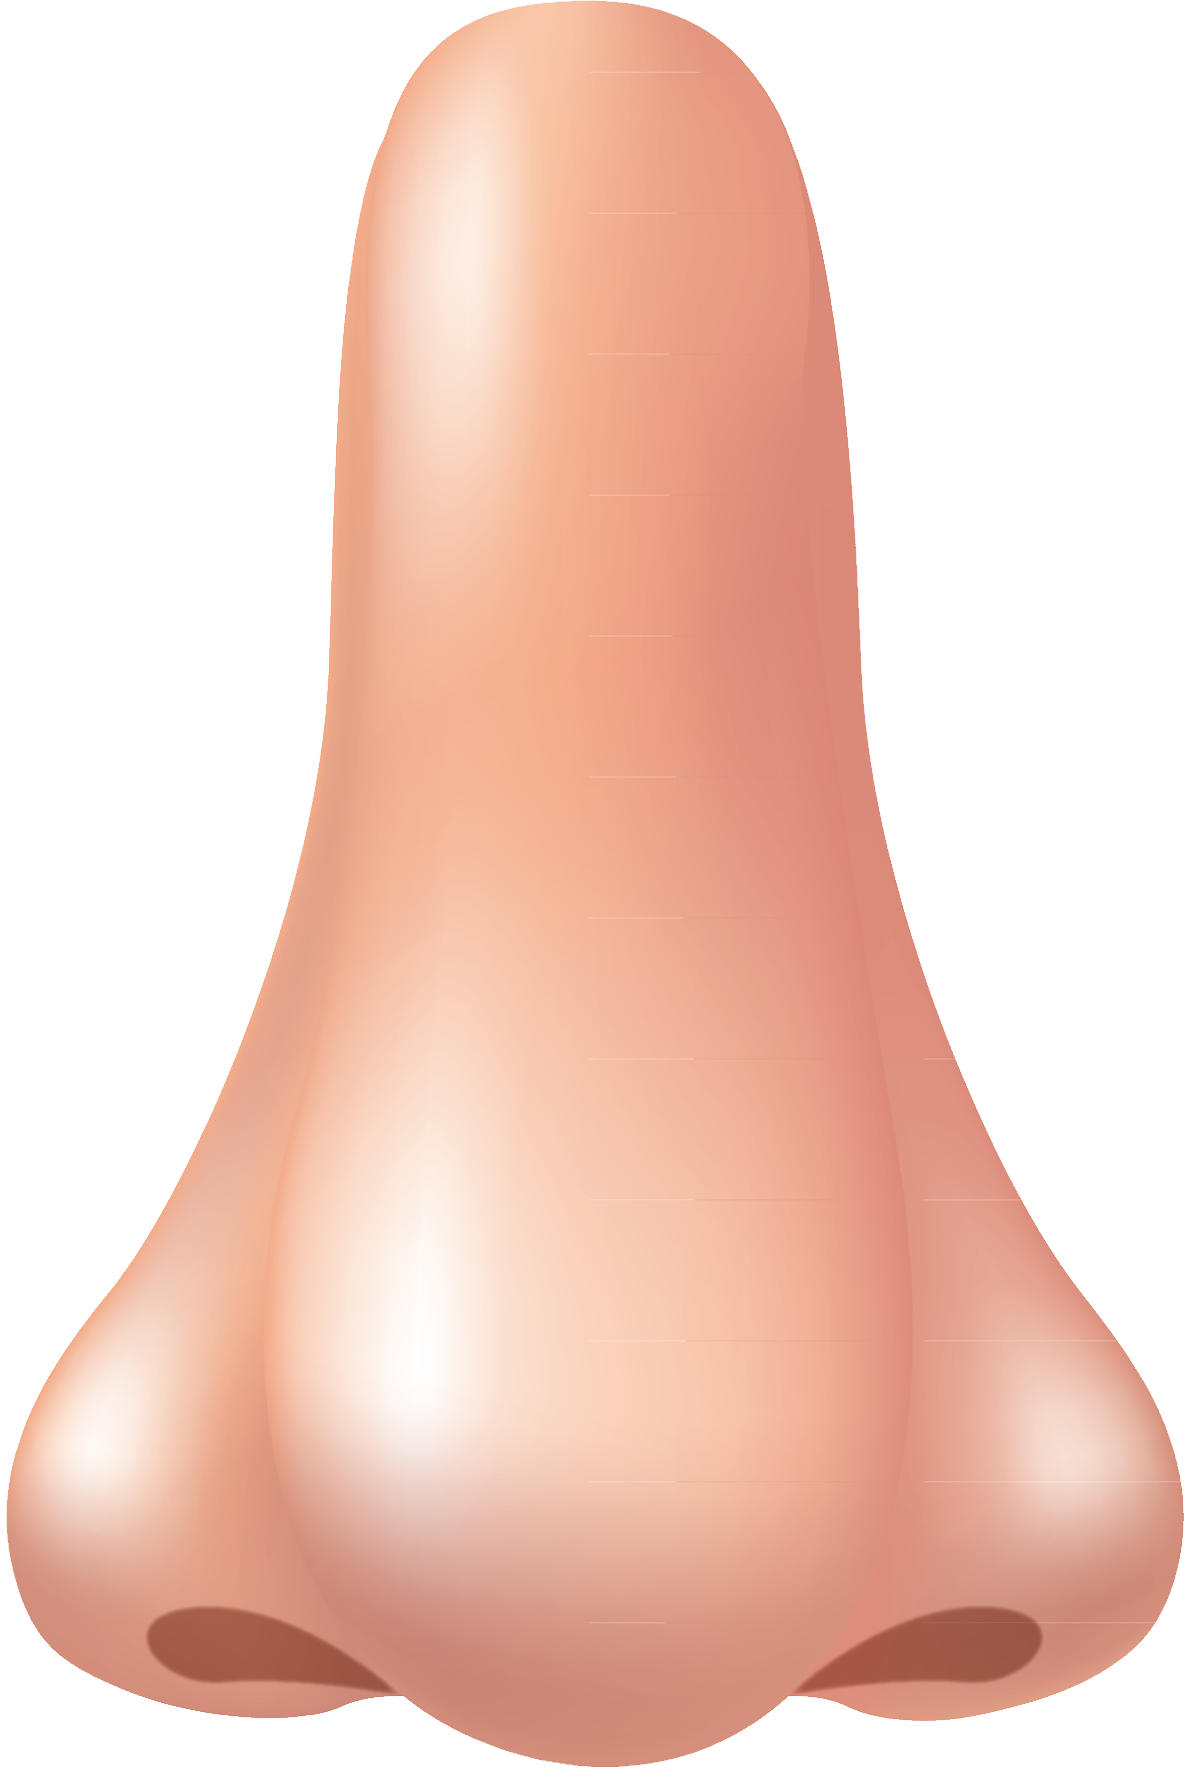 Human Nose Clipart Background PNG Image